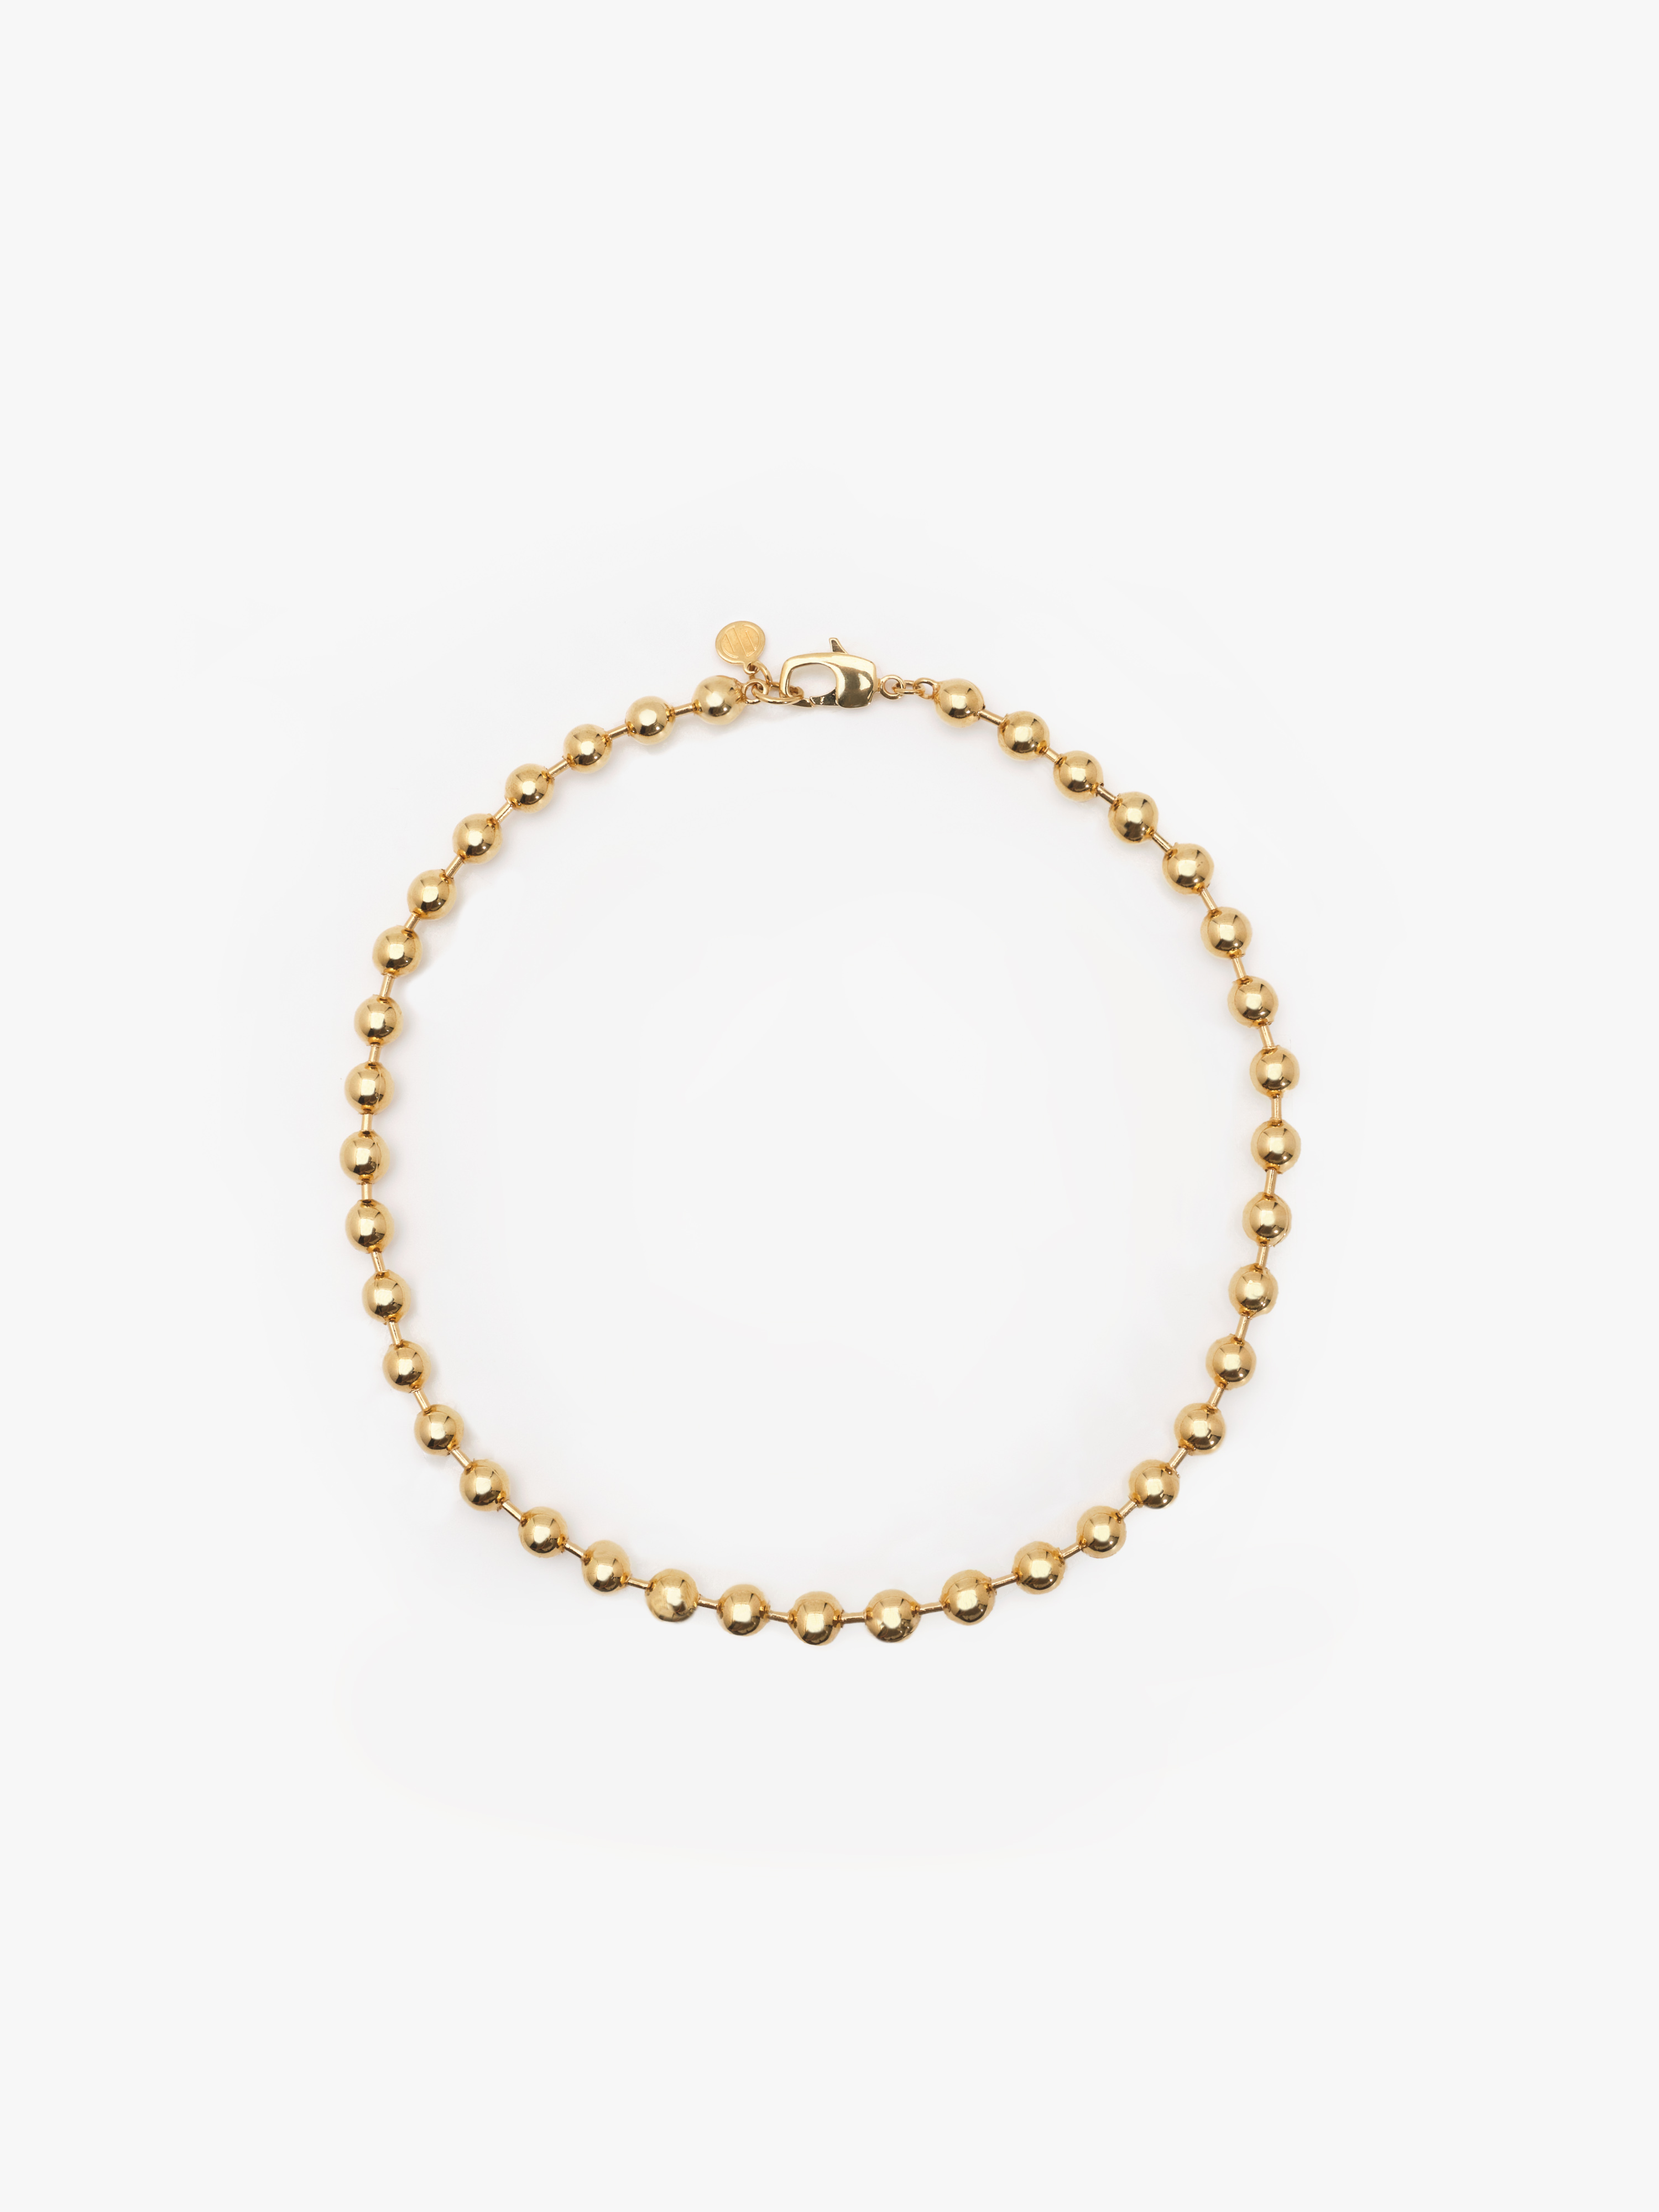 BALLBALL NECKLACE / GOLD